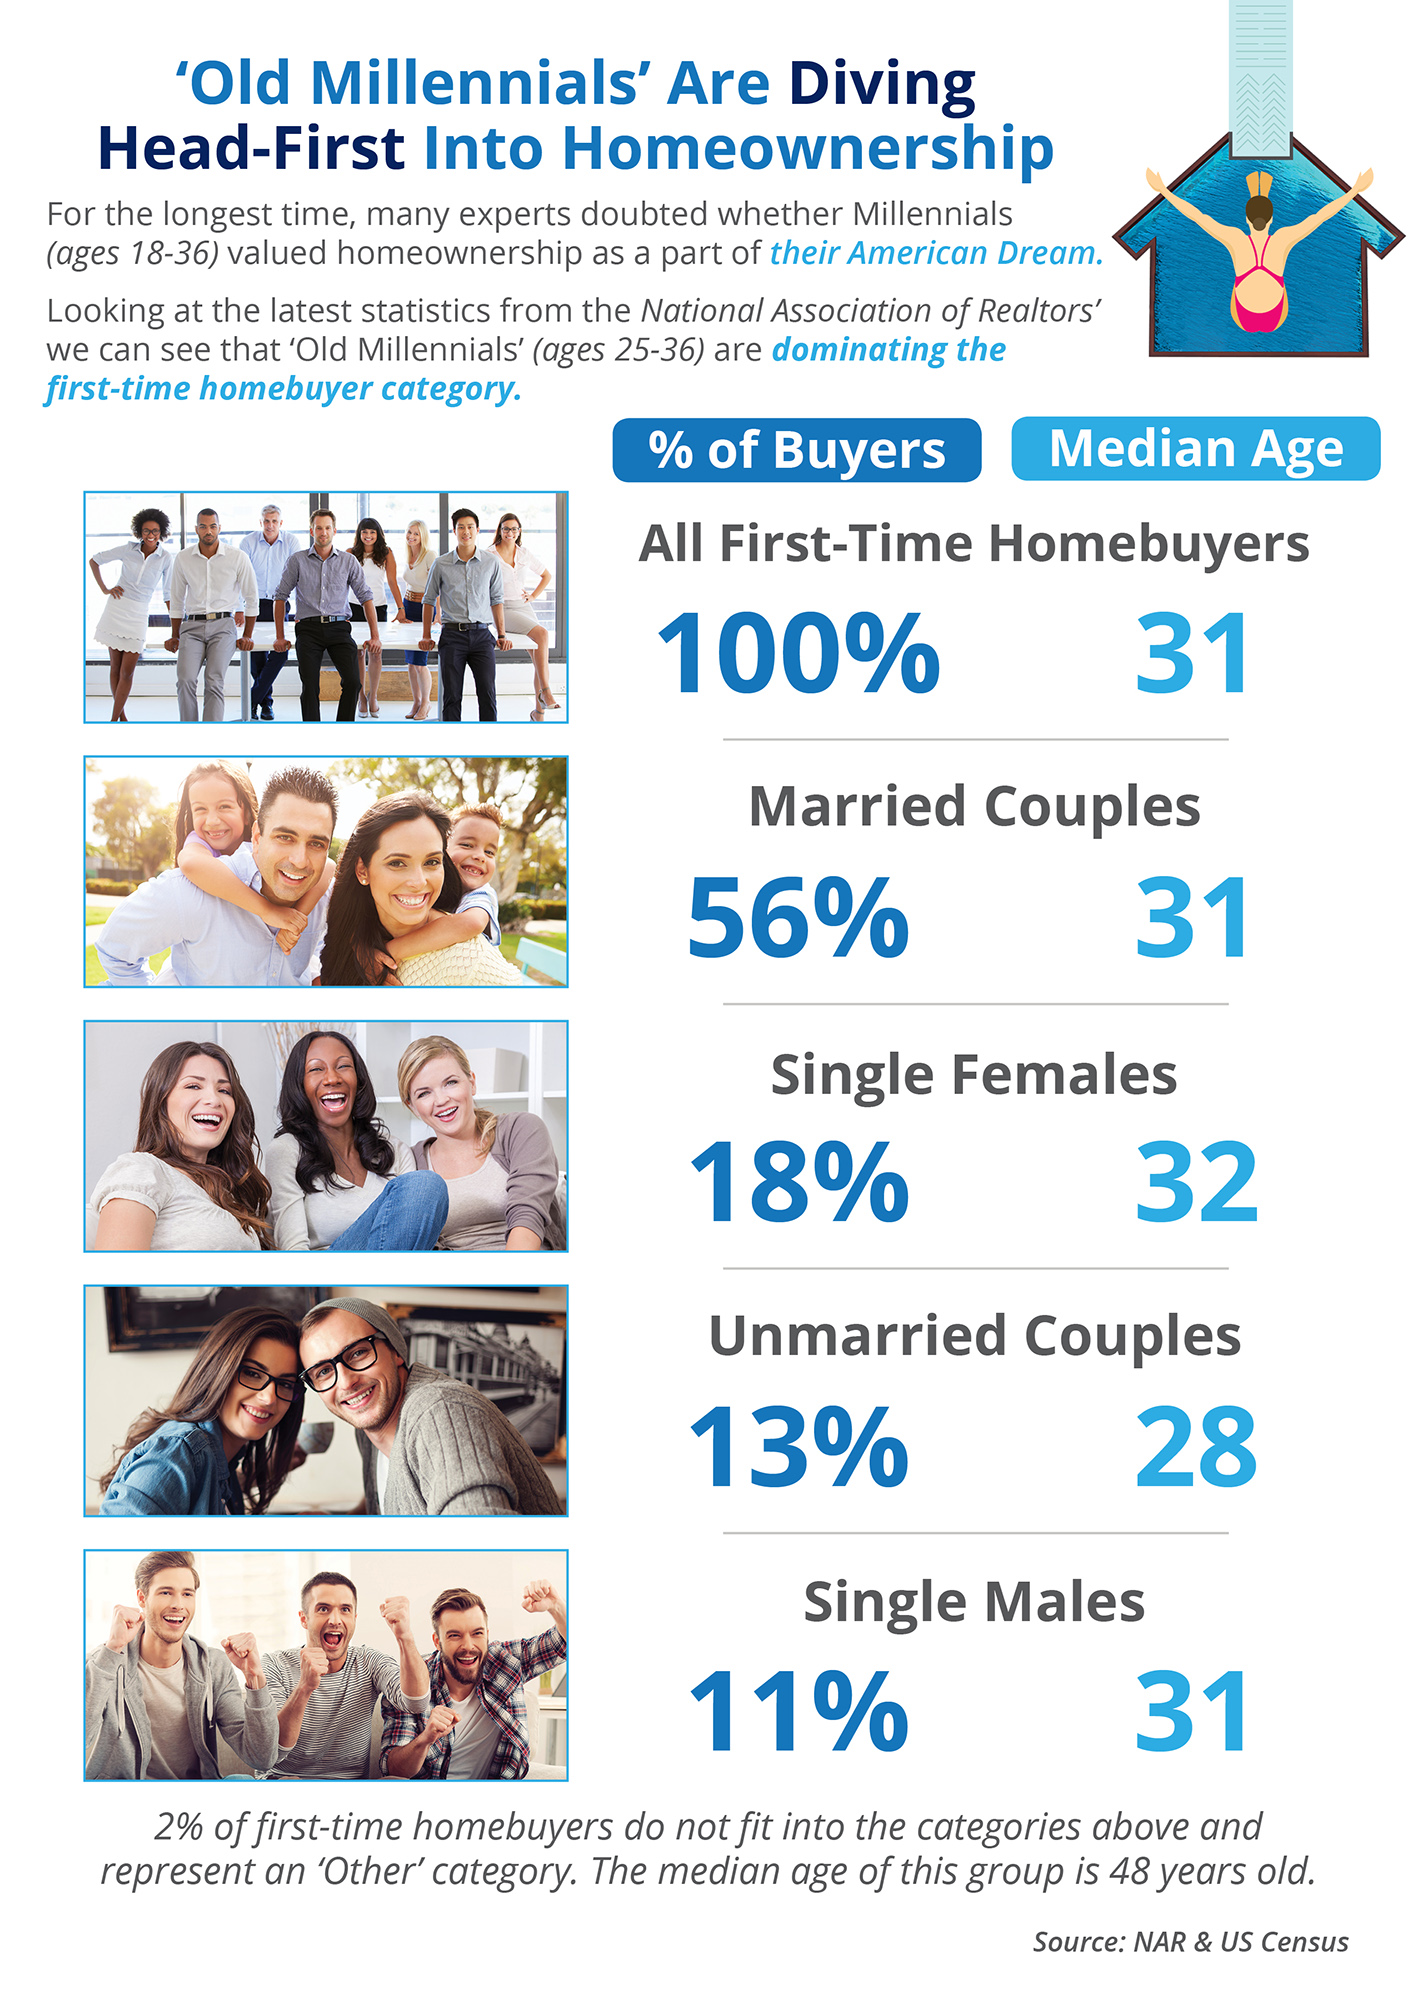 ‘Old Millennials’ Are Diving Head-First into Homeownership [INFOGRAPHIC] | Simplifying The Market